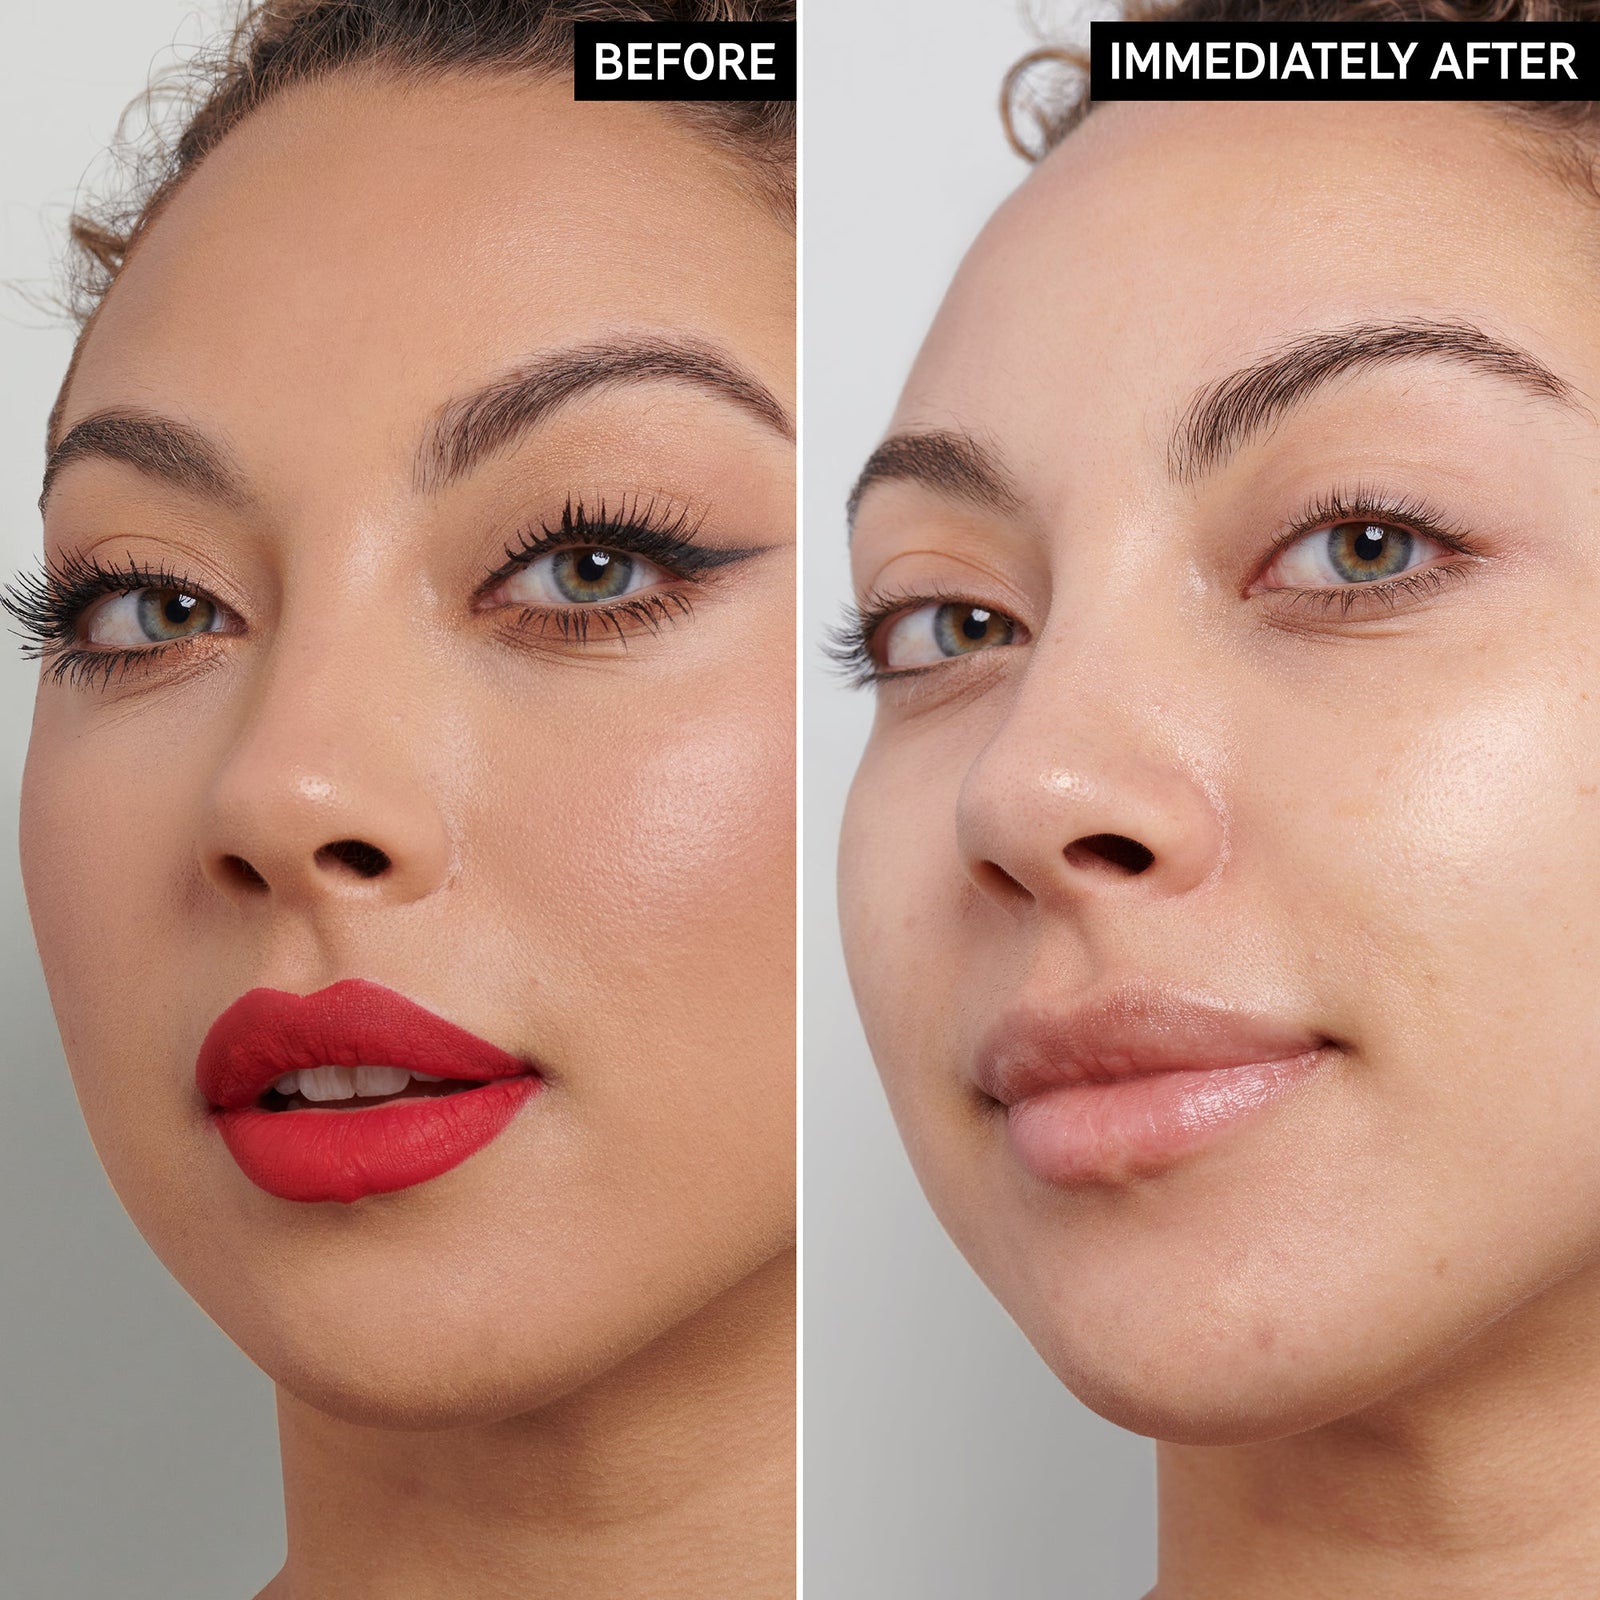 2 images of a model's face side by side to show before and immediately after taking makeup off with Oat Cleansing Balm